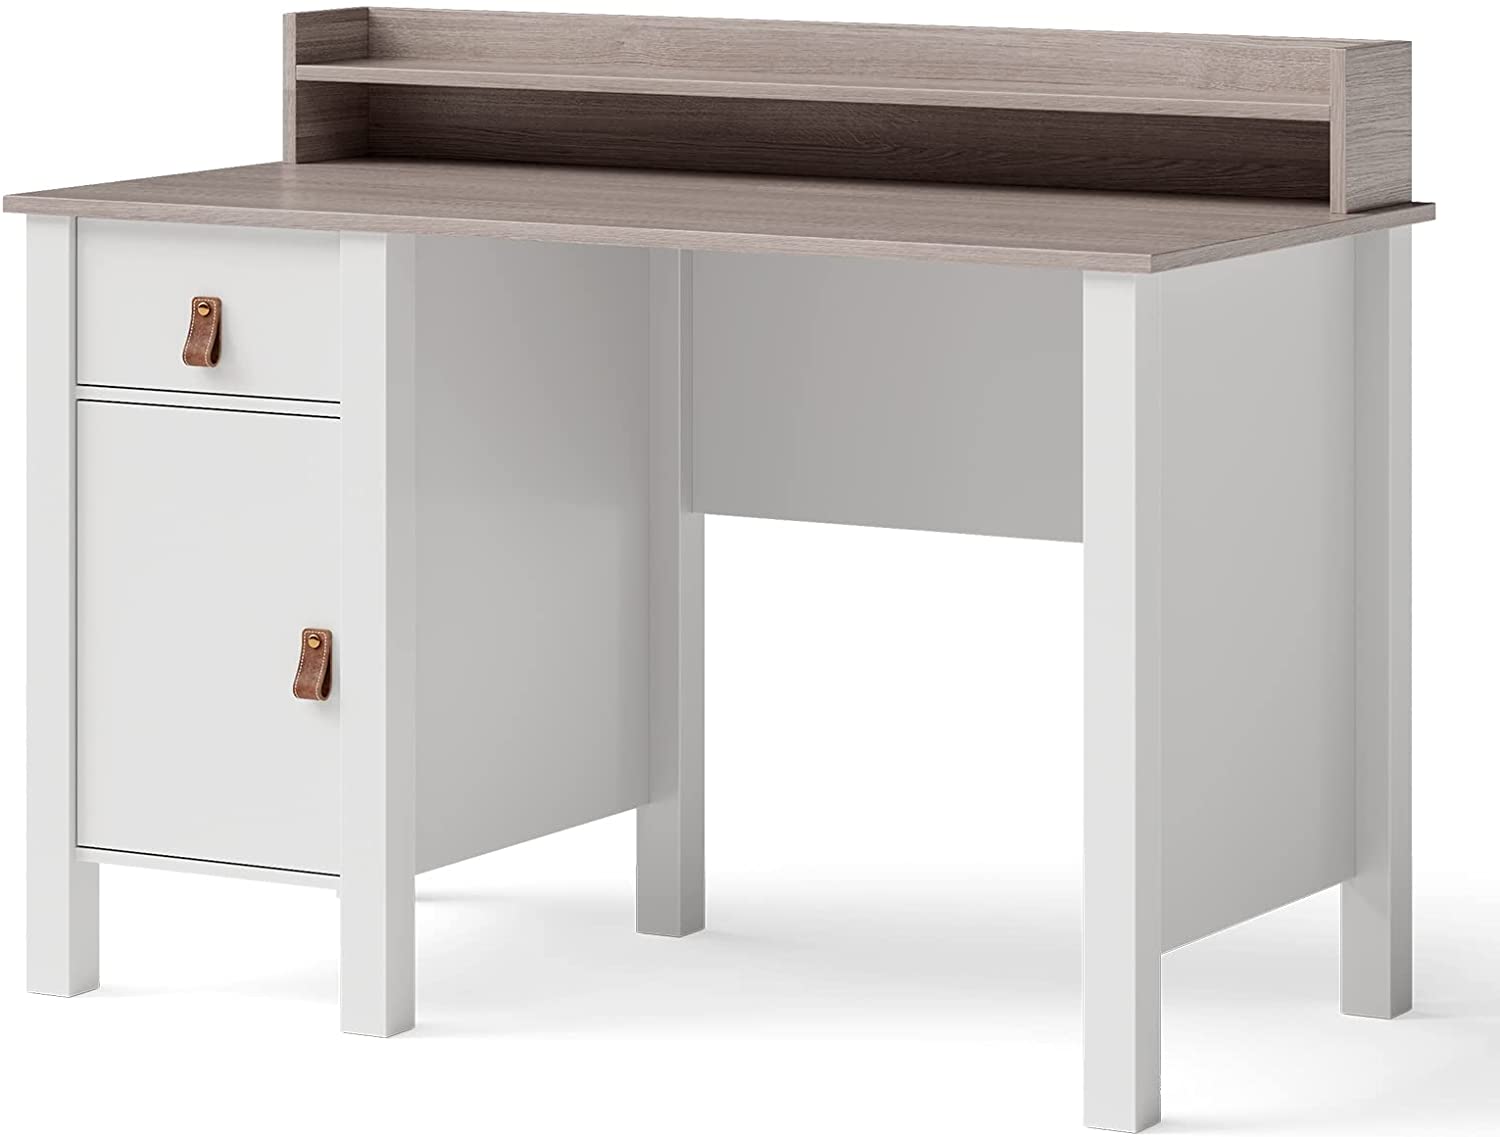 Computer Desk with Storage Drawer & Cabinet - Tangkula